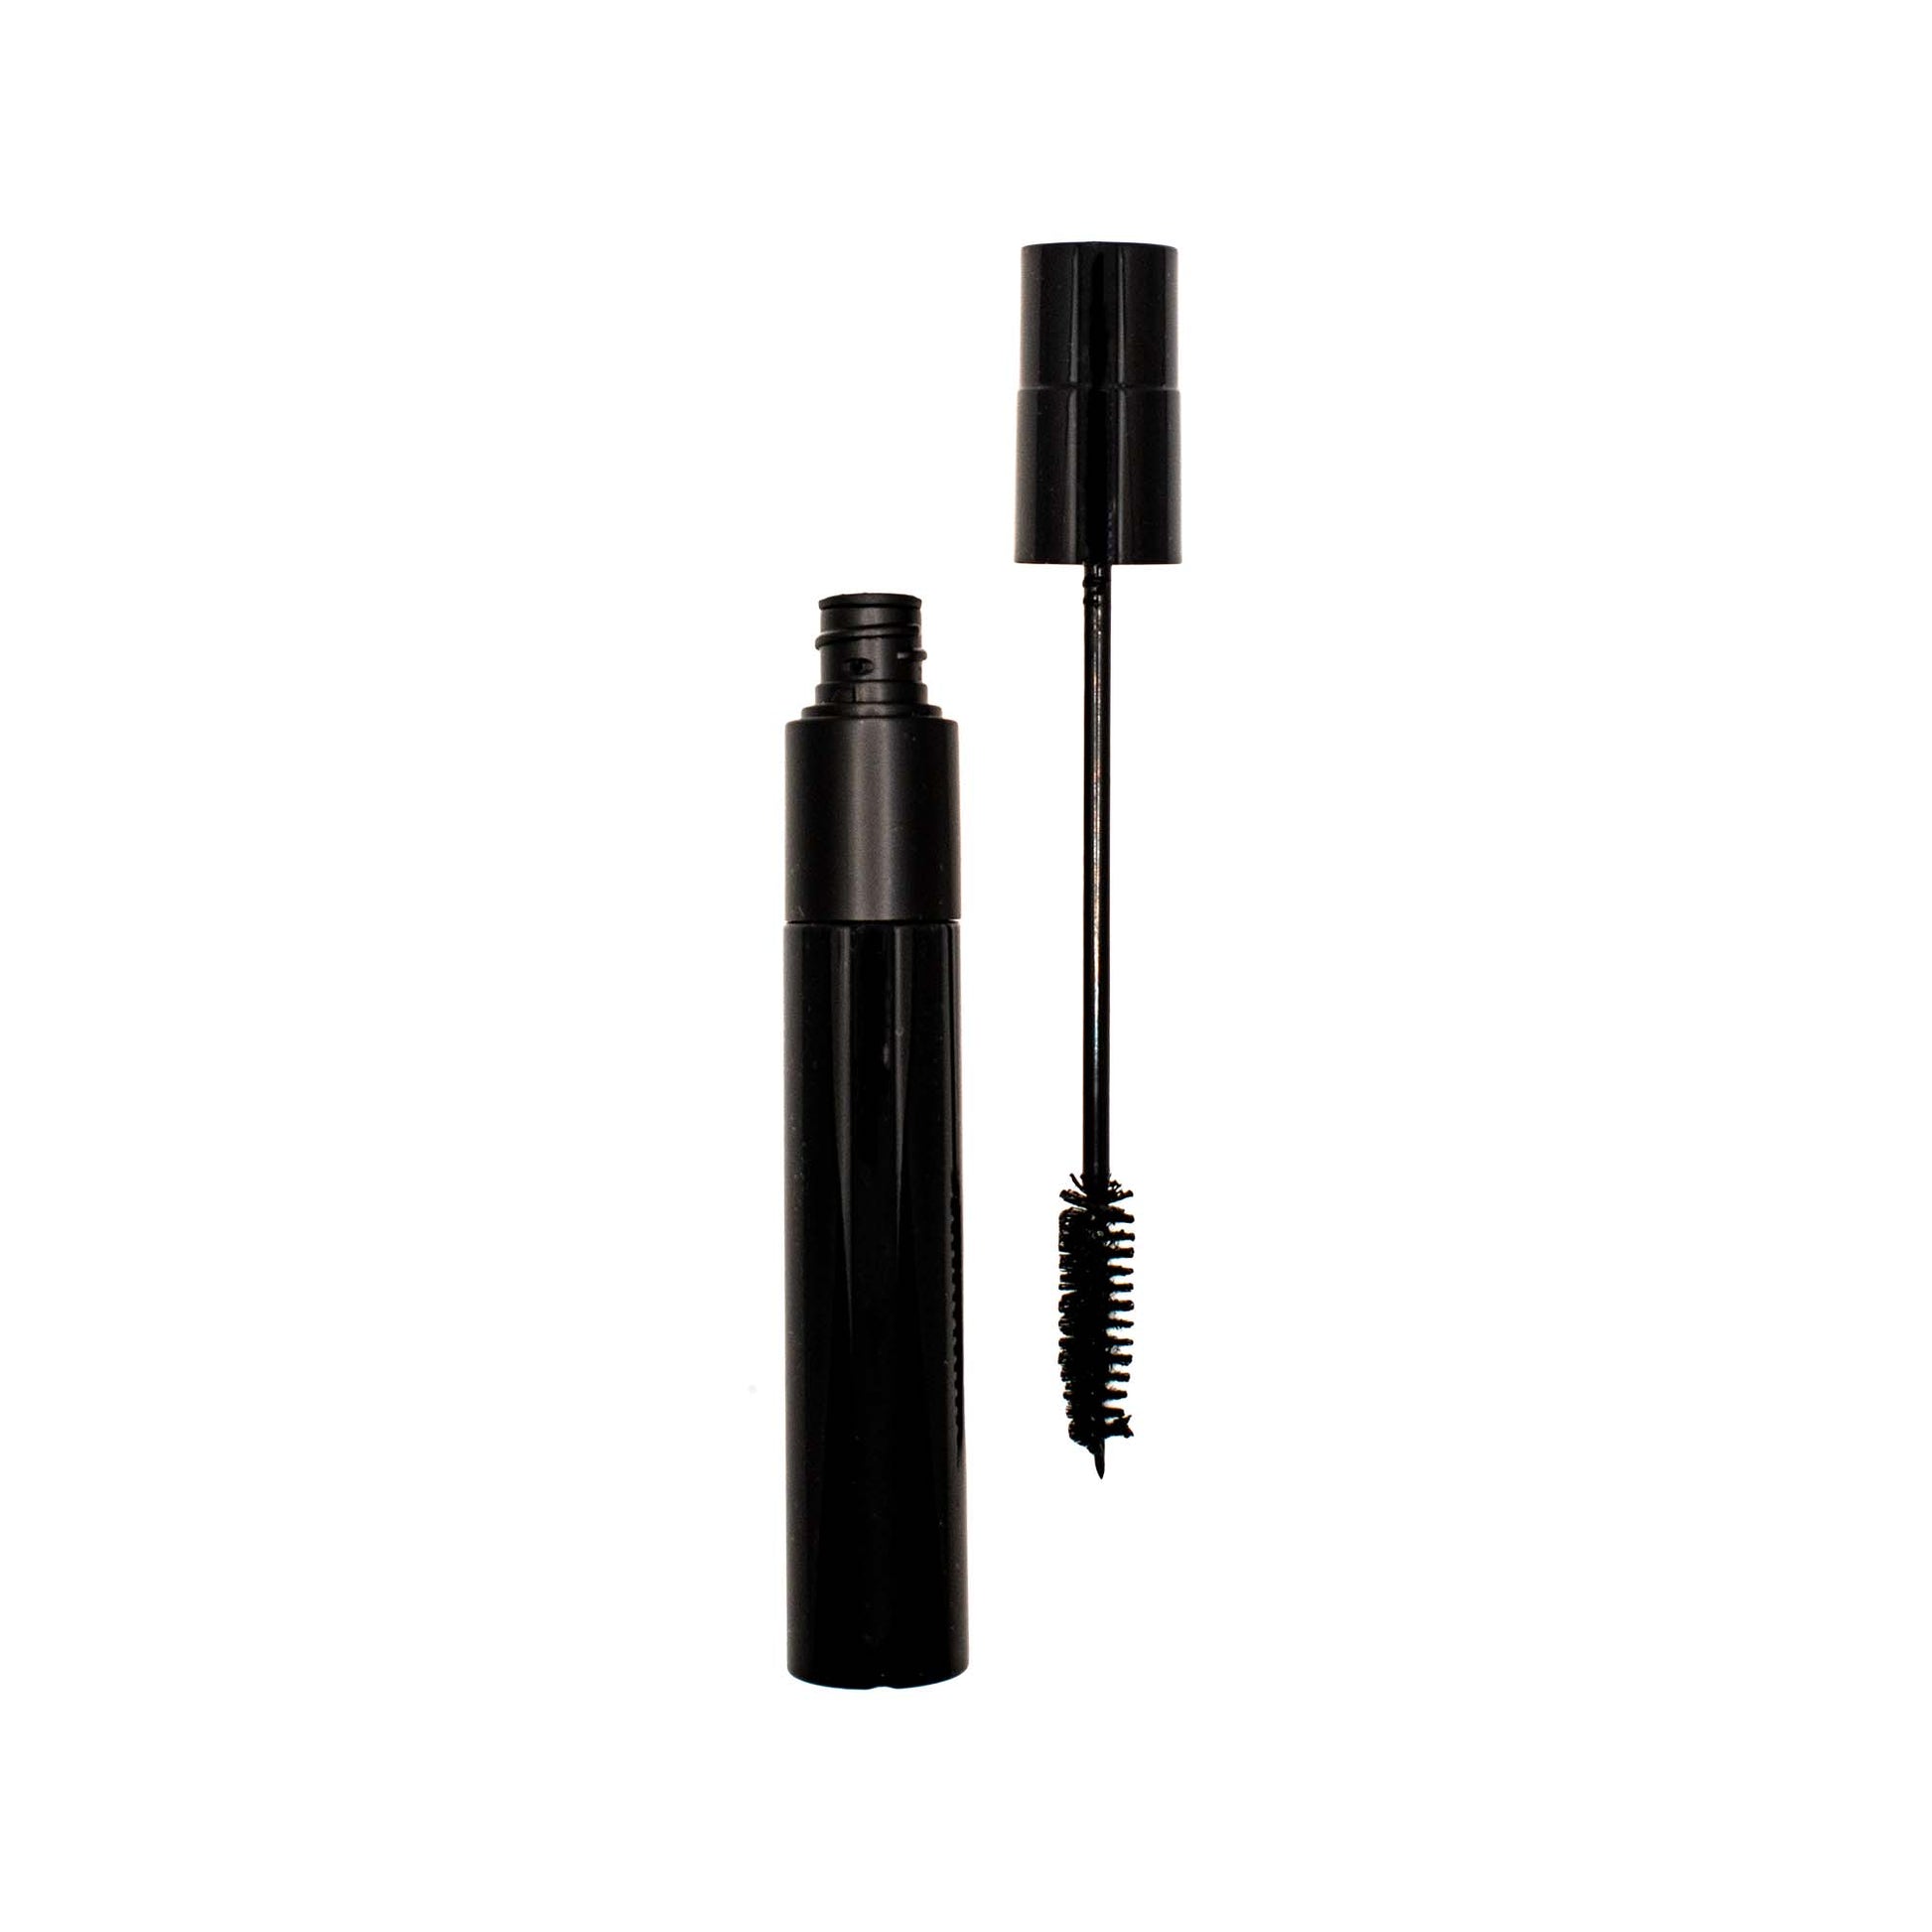 Get maximum volume with our new Cruisin Organics Dual Lash Mascara - Black. Choose a natural or full-volume look with our two wands. Say goodbye to smudging or flaking with our formula.